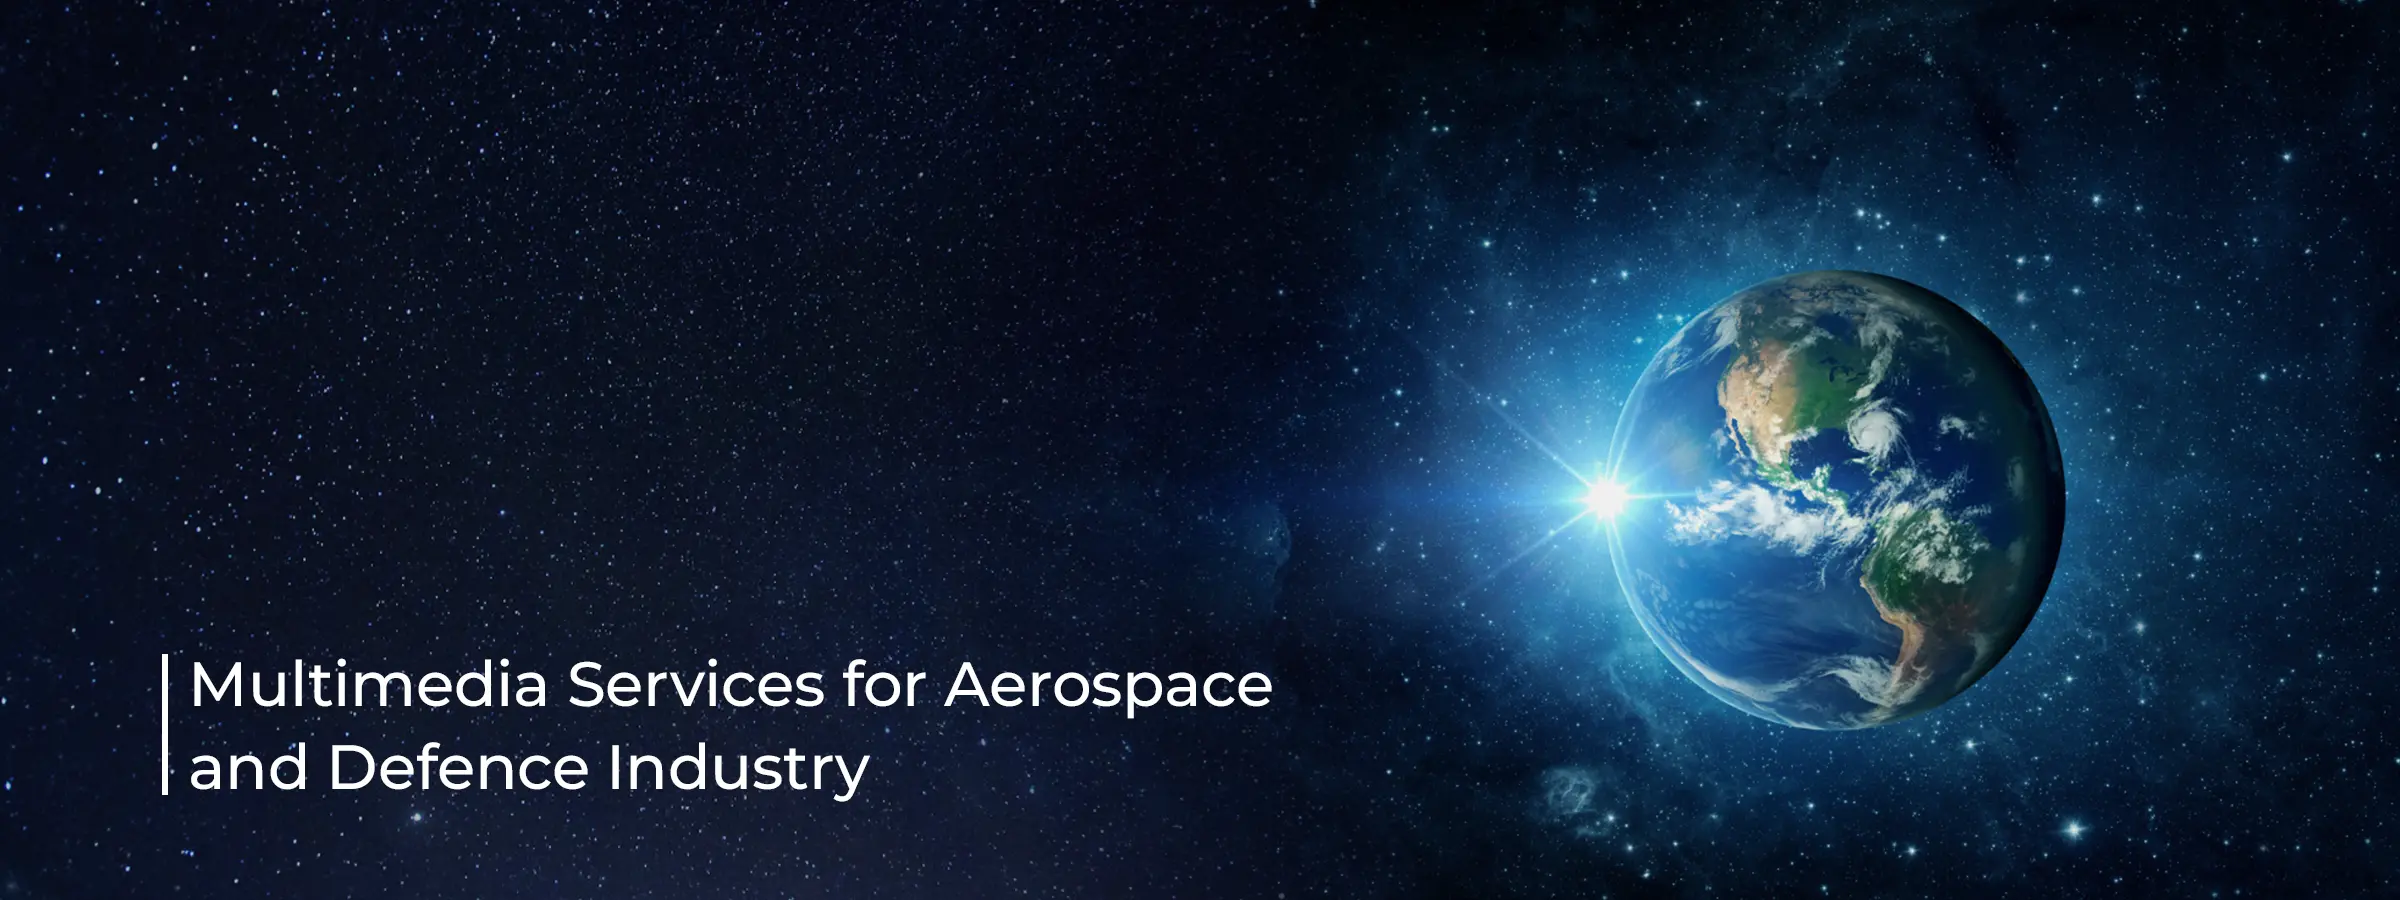 premier-multimedia-services-for-the-aerospace-and-defense-industry